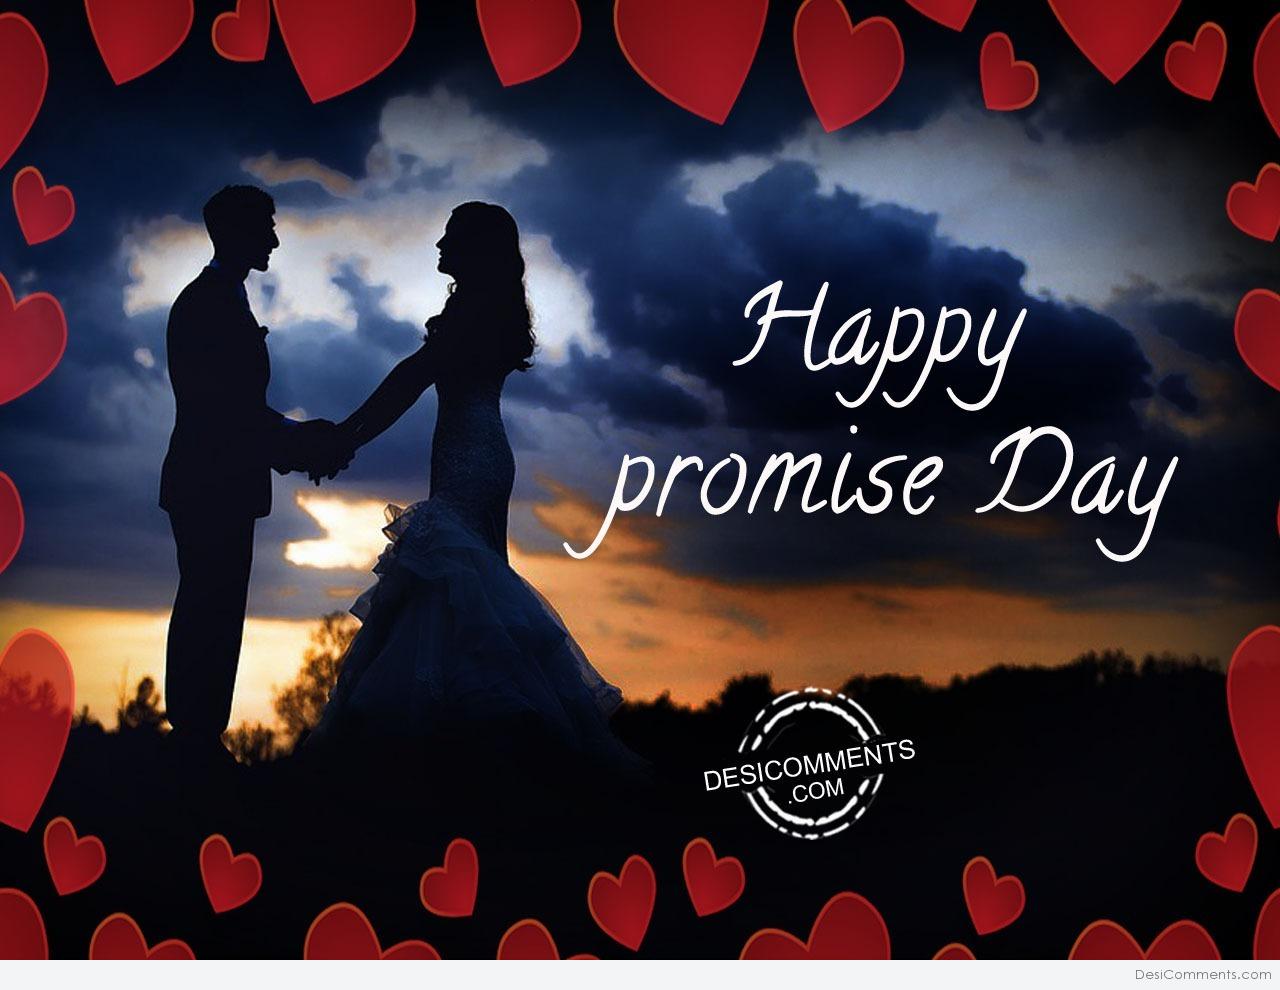 VeryHappy promise day - DesiComments.com